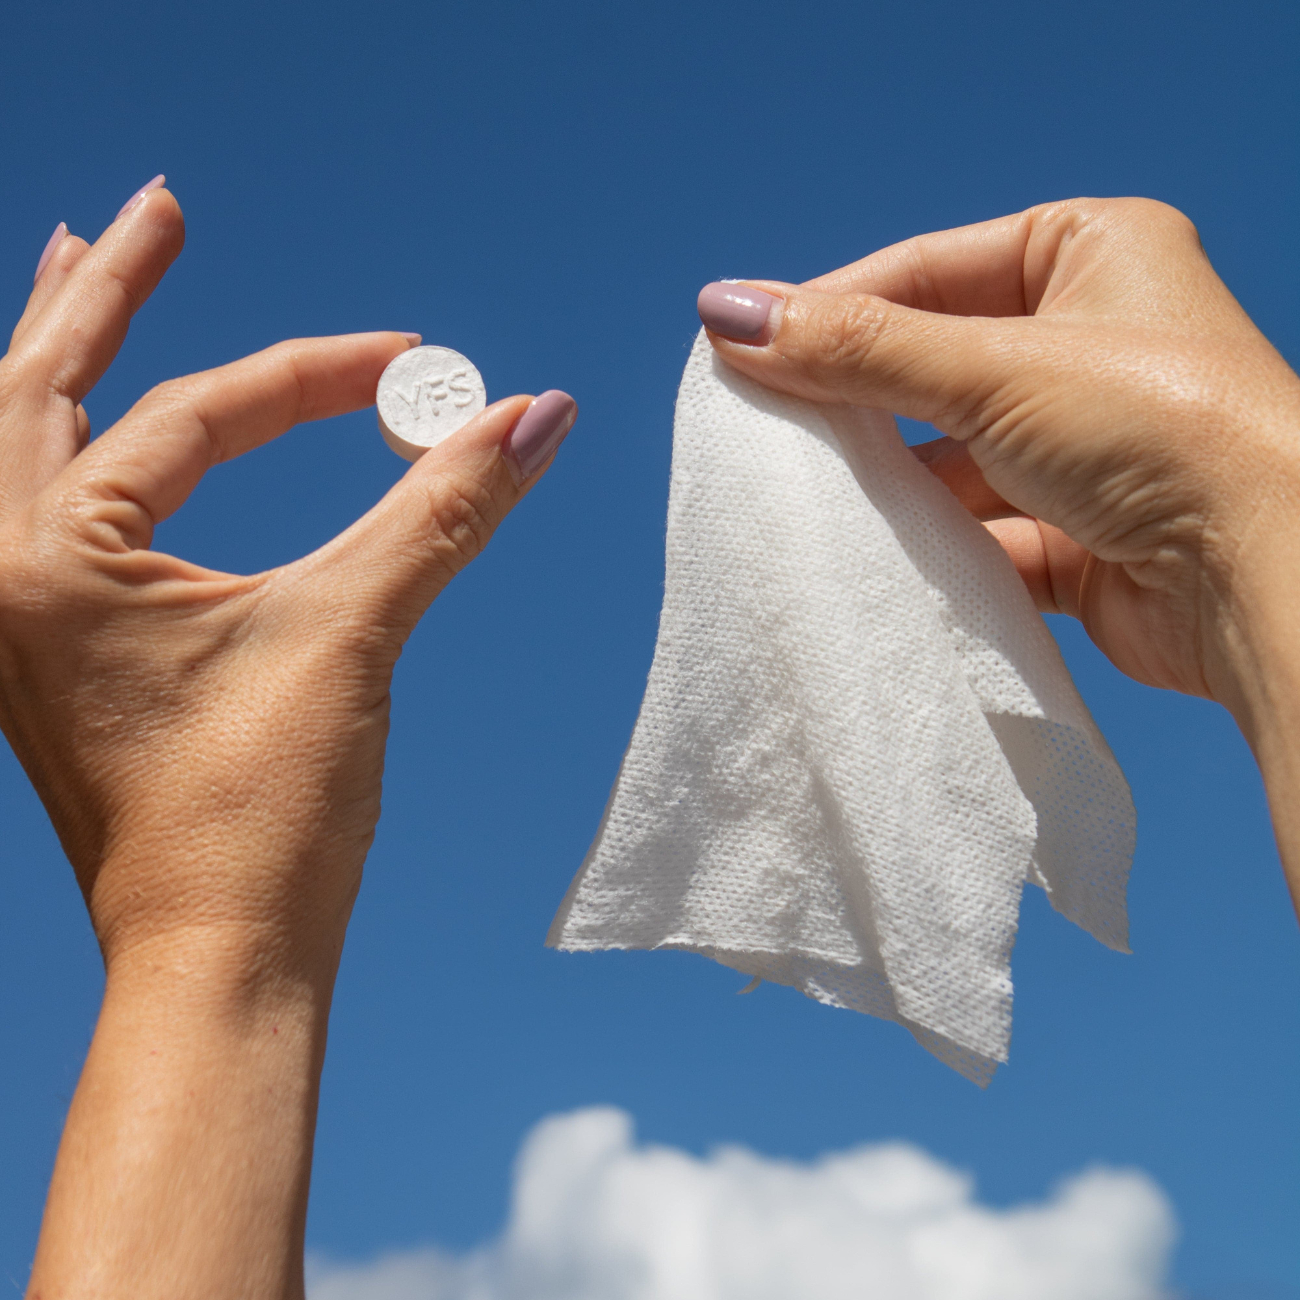 A photo of 2 hands against the sky. One is holding a cleansing cloth that hasn't been soaked in water and is the round shape. The next is holding a cloth that has been expanded in water and is a square shape.